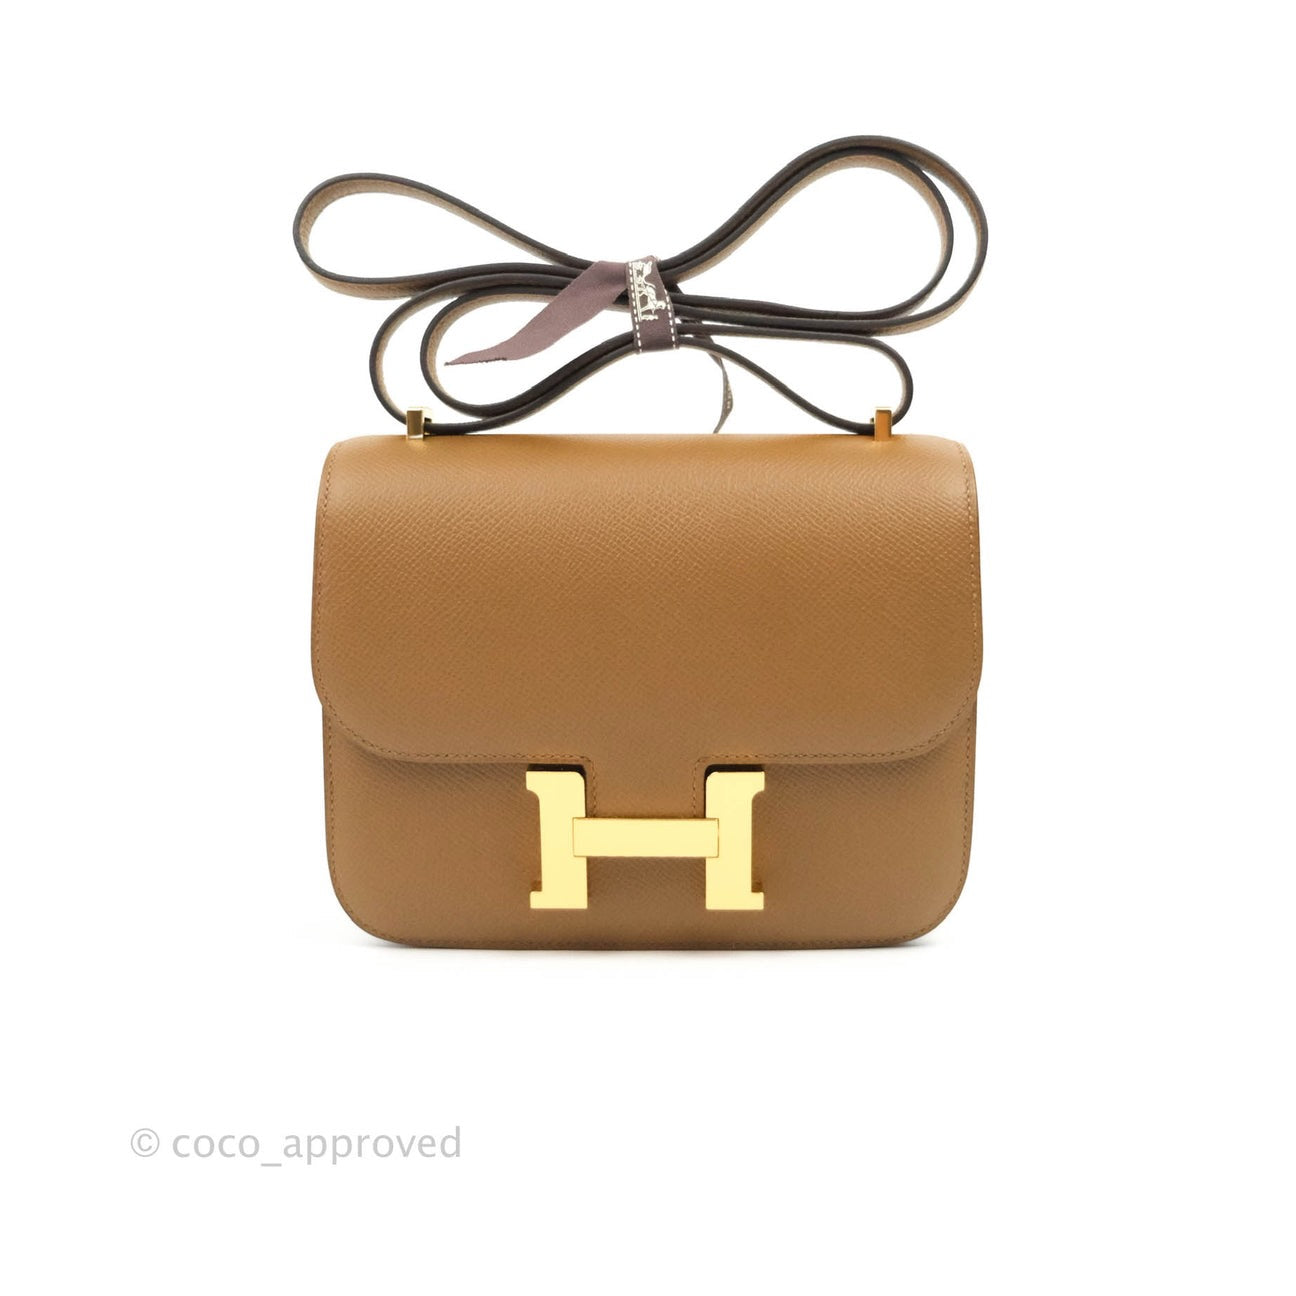 Can You Name Any Hermès Handbag Signature Colours? The Most Wanted